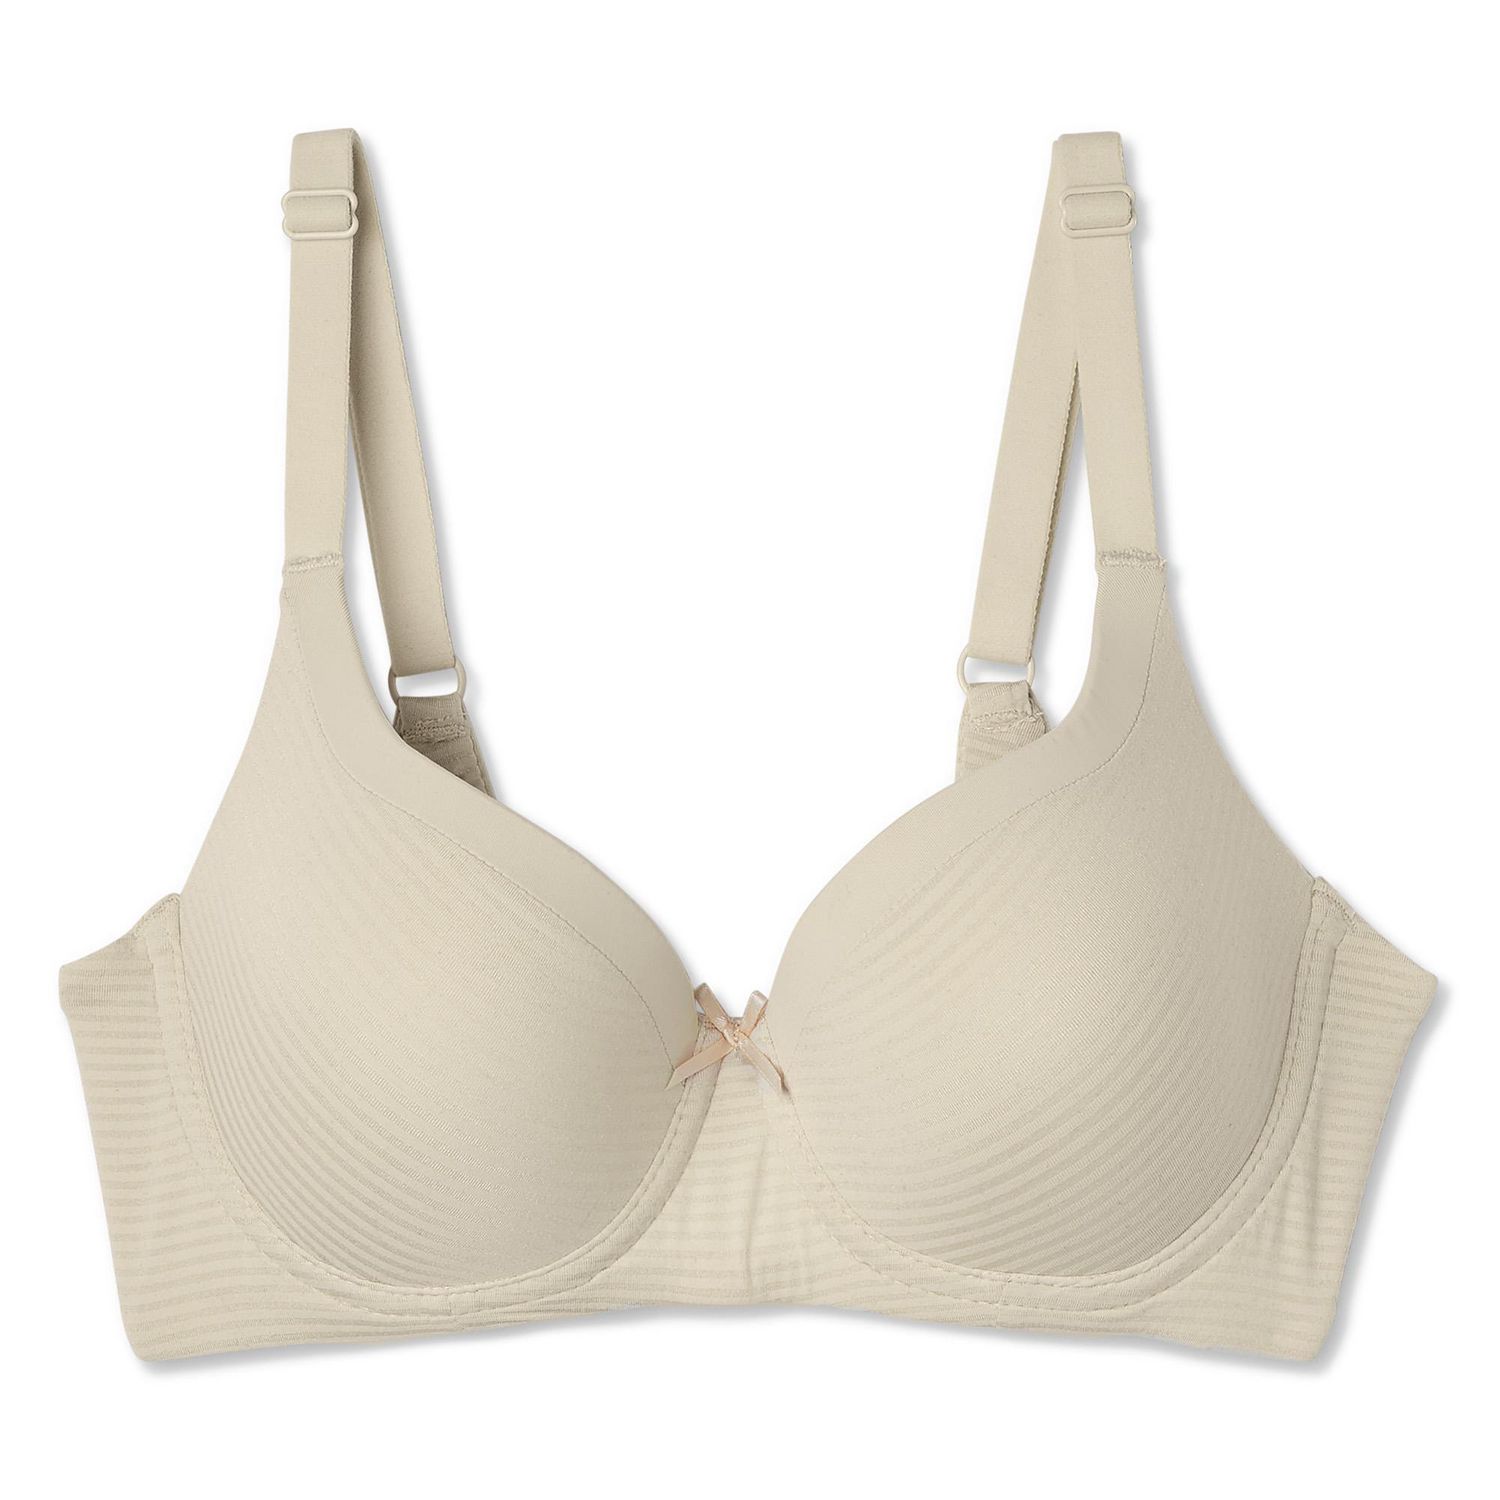 M&s Lace Cotton Rich Non-padded Full Cup Bra Cool Comfort? 34 36 38 40 42 A-dd, Bras & Bra Sets